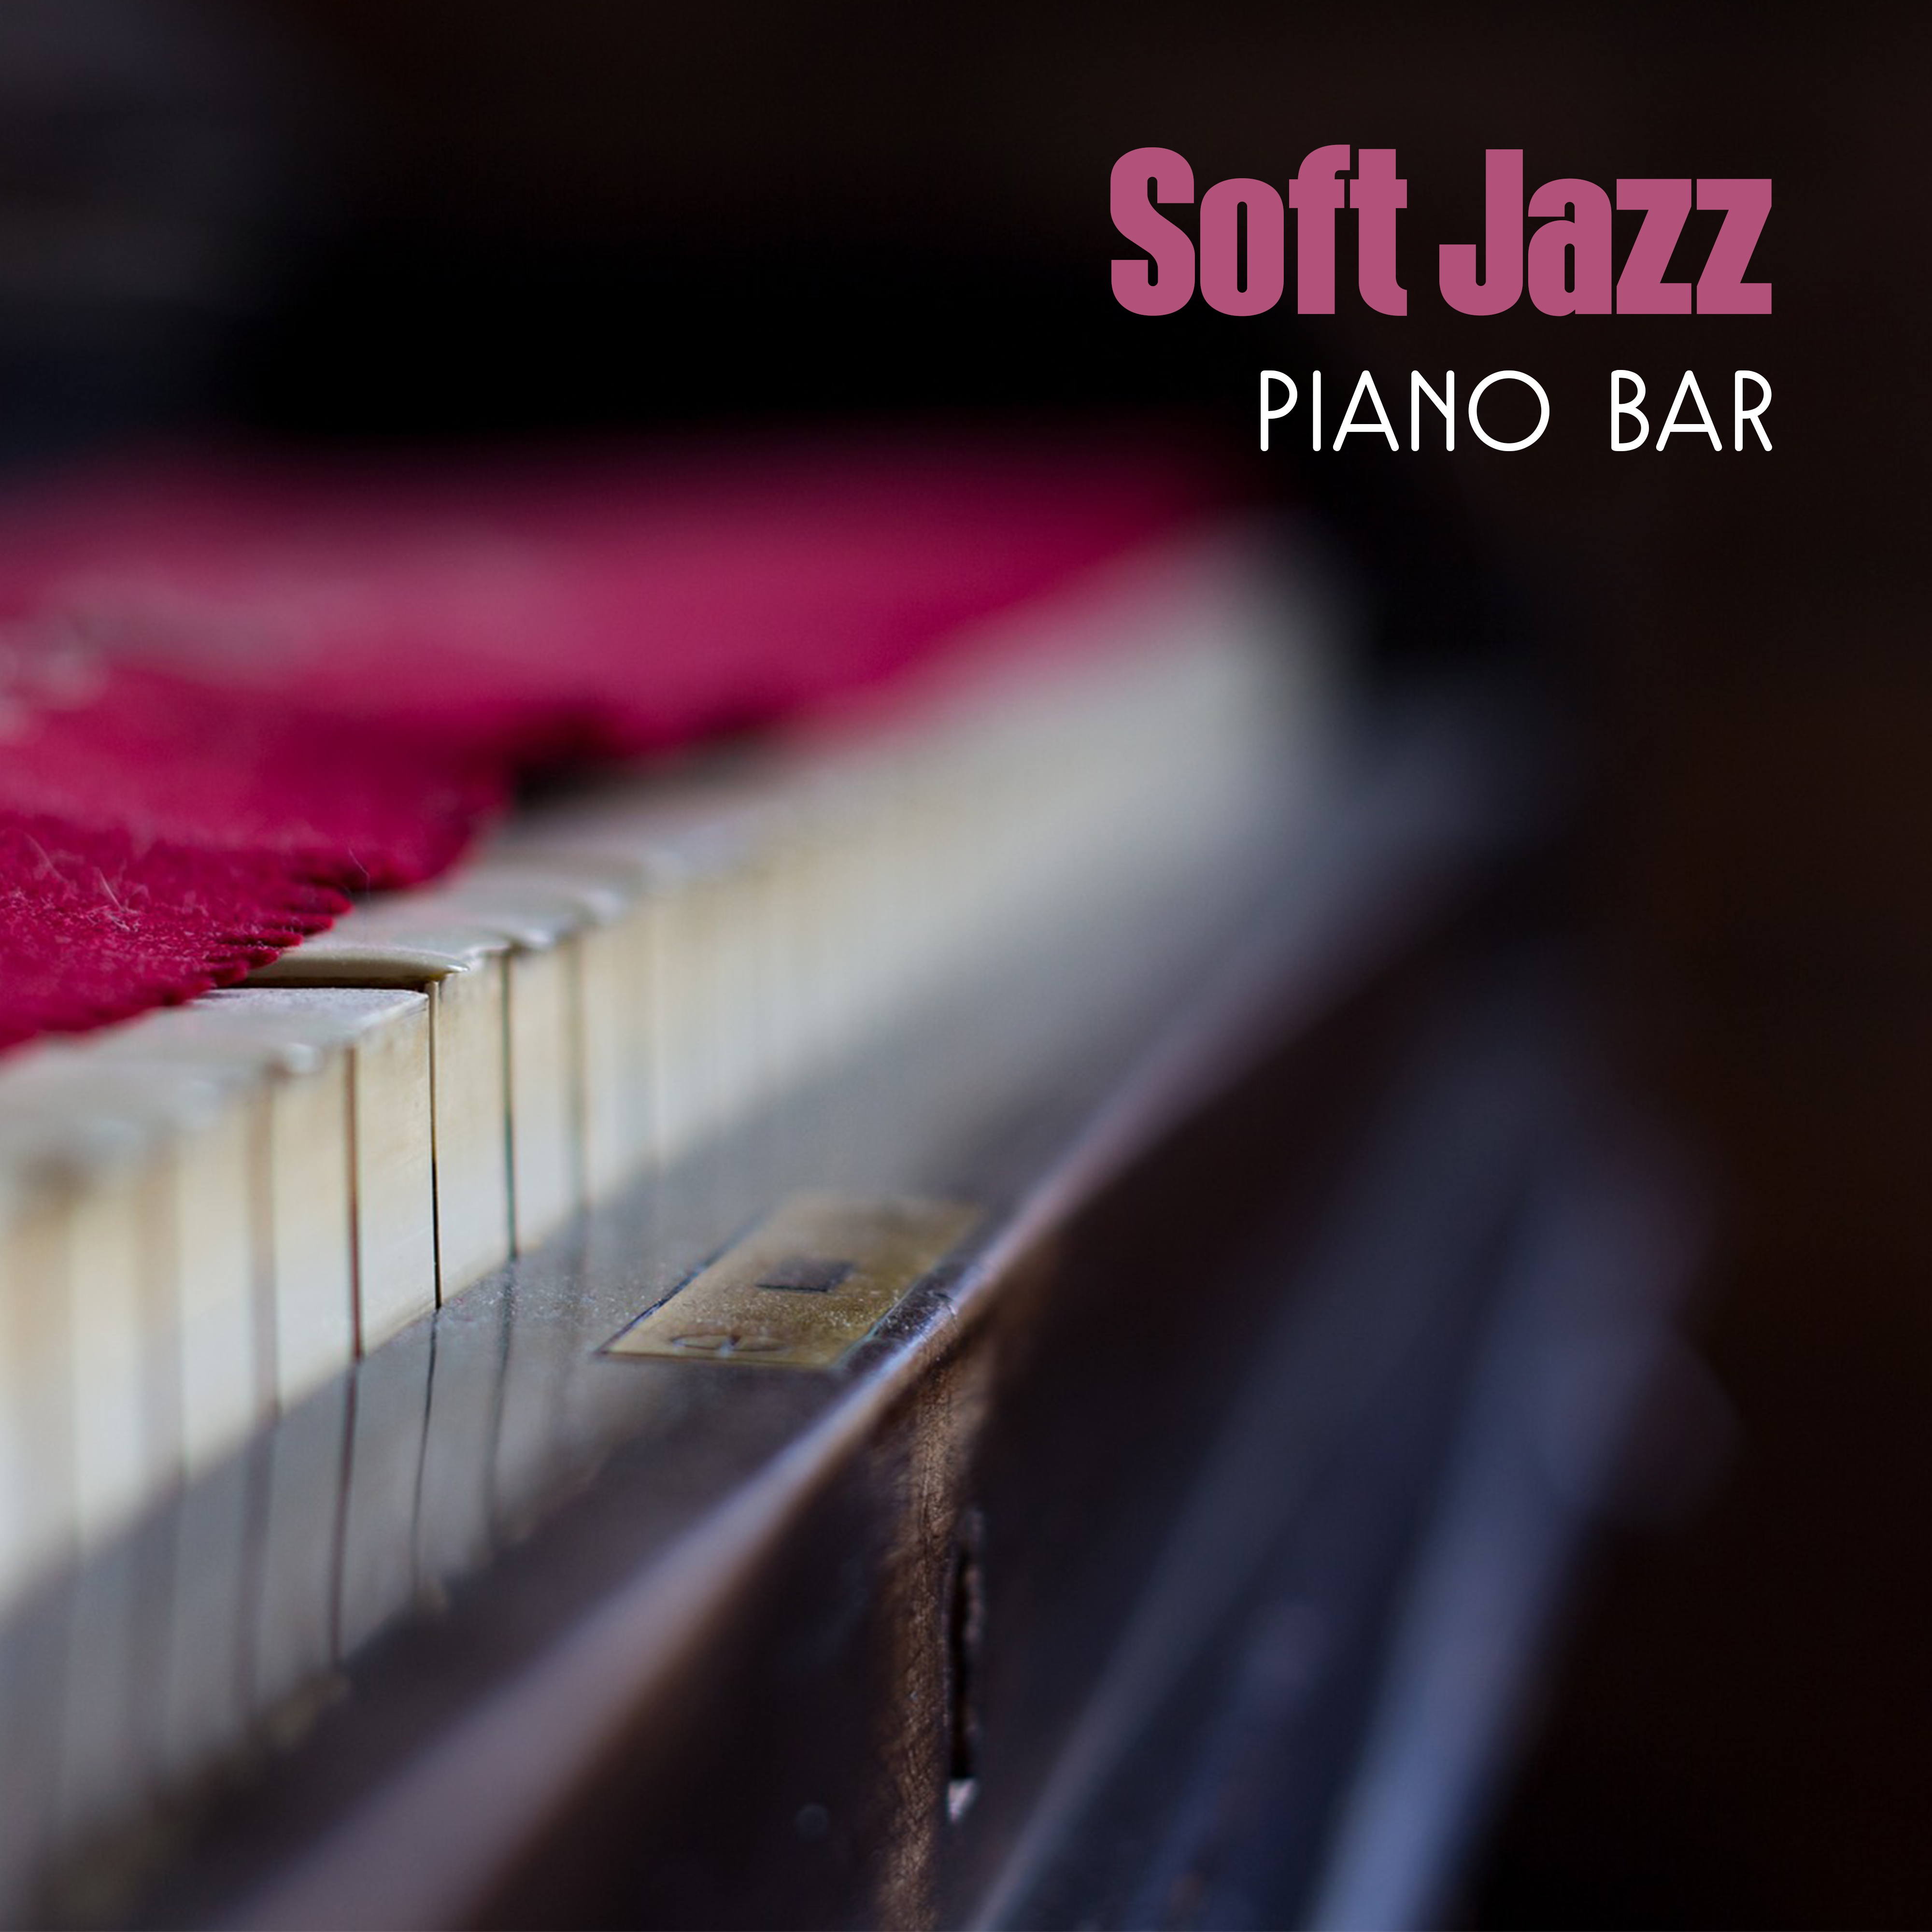 Soft Jazz Piano Bar – Instrumental Music for Restaurant, Jazz Cafe, Relaxing Music After Work, Stress Relief, Cafe Bar, Relax